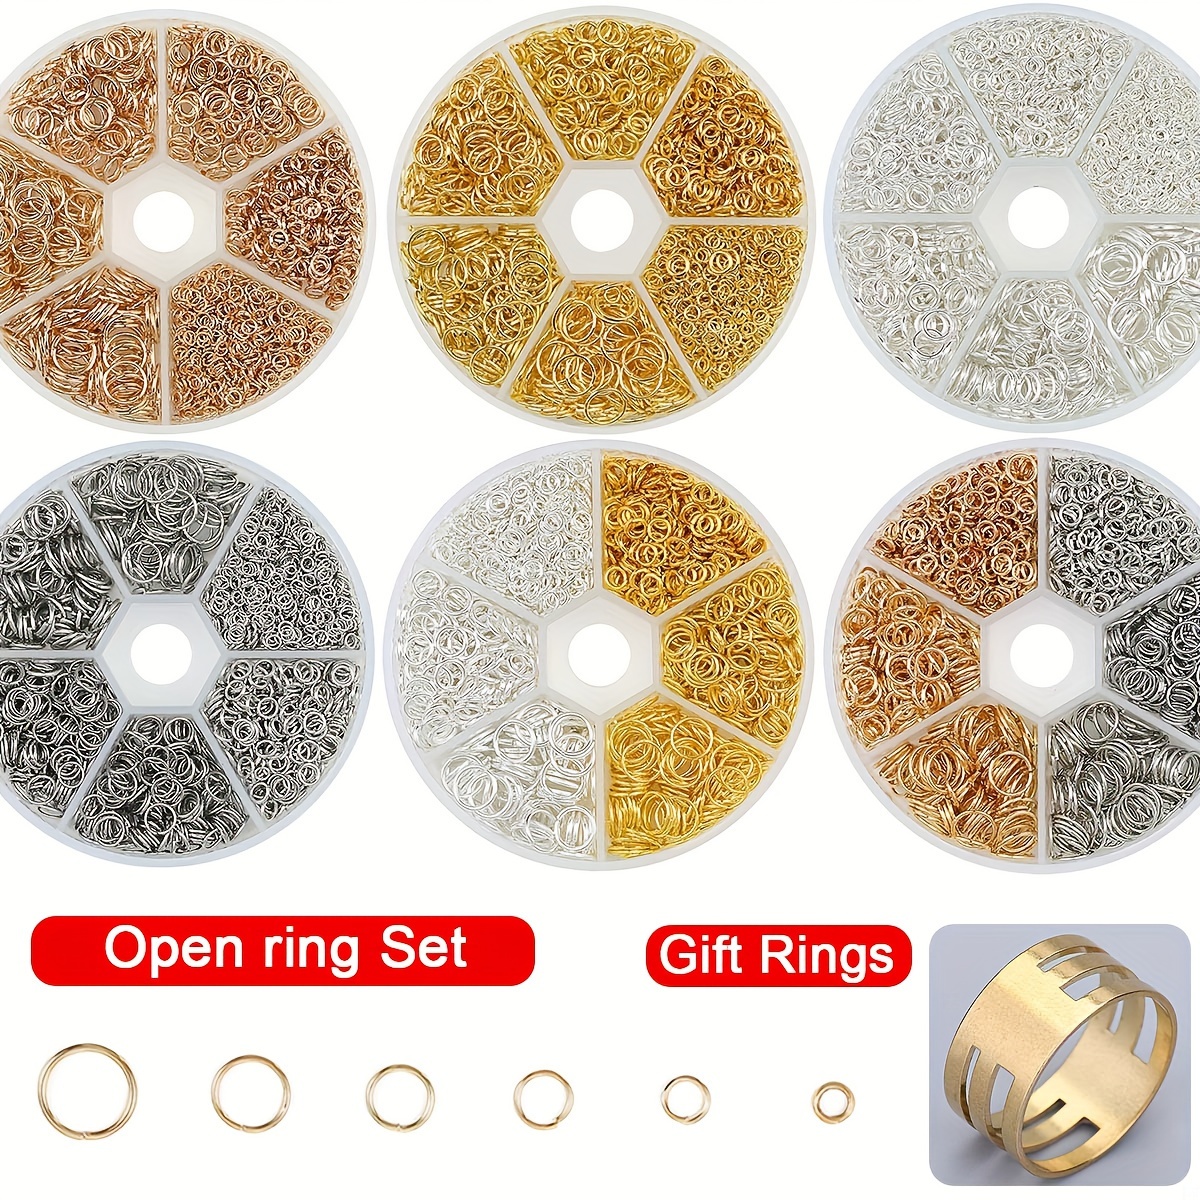 Jewelry Repair Kit - A New Day™ Gold